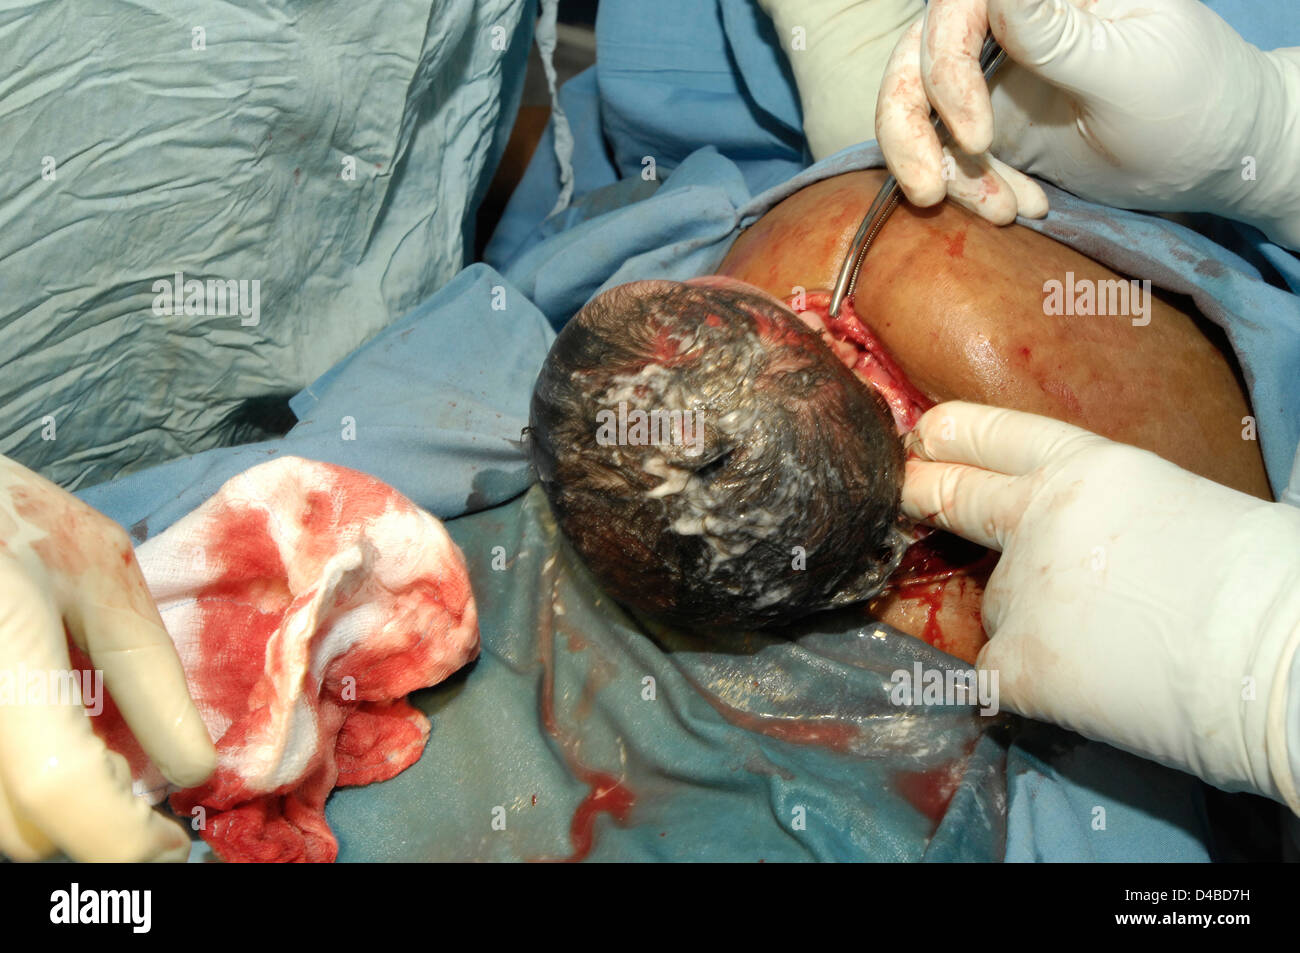 Cesarean delivery. Baby's head emerging from wound out of its mother's uterus Stock Photo